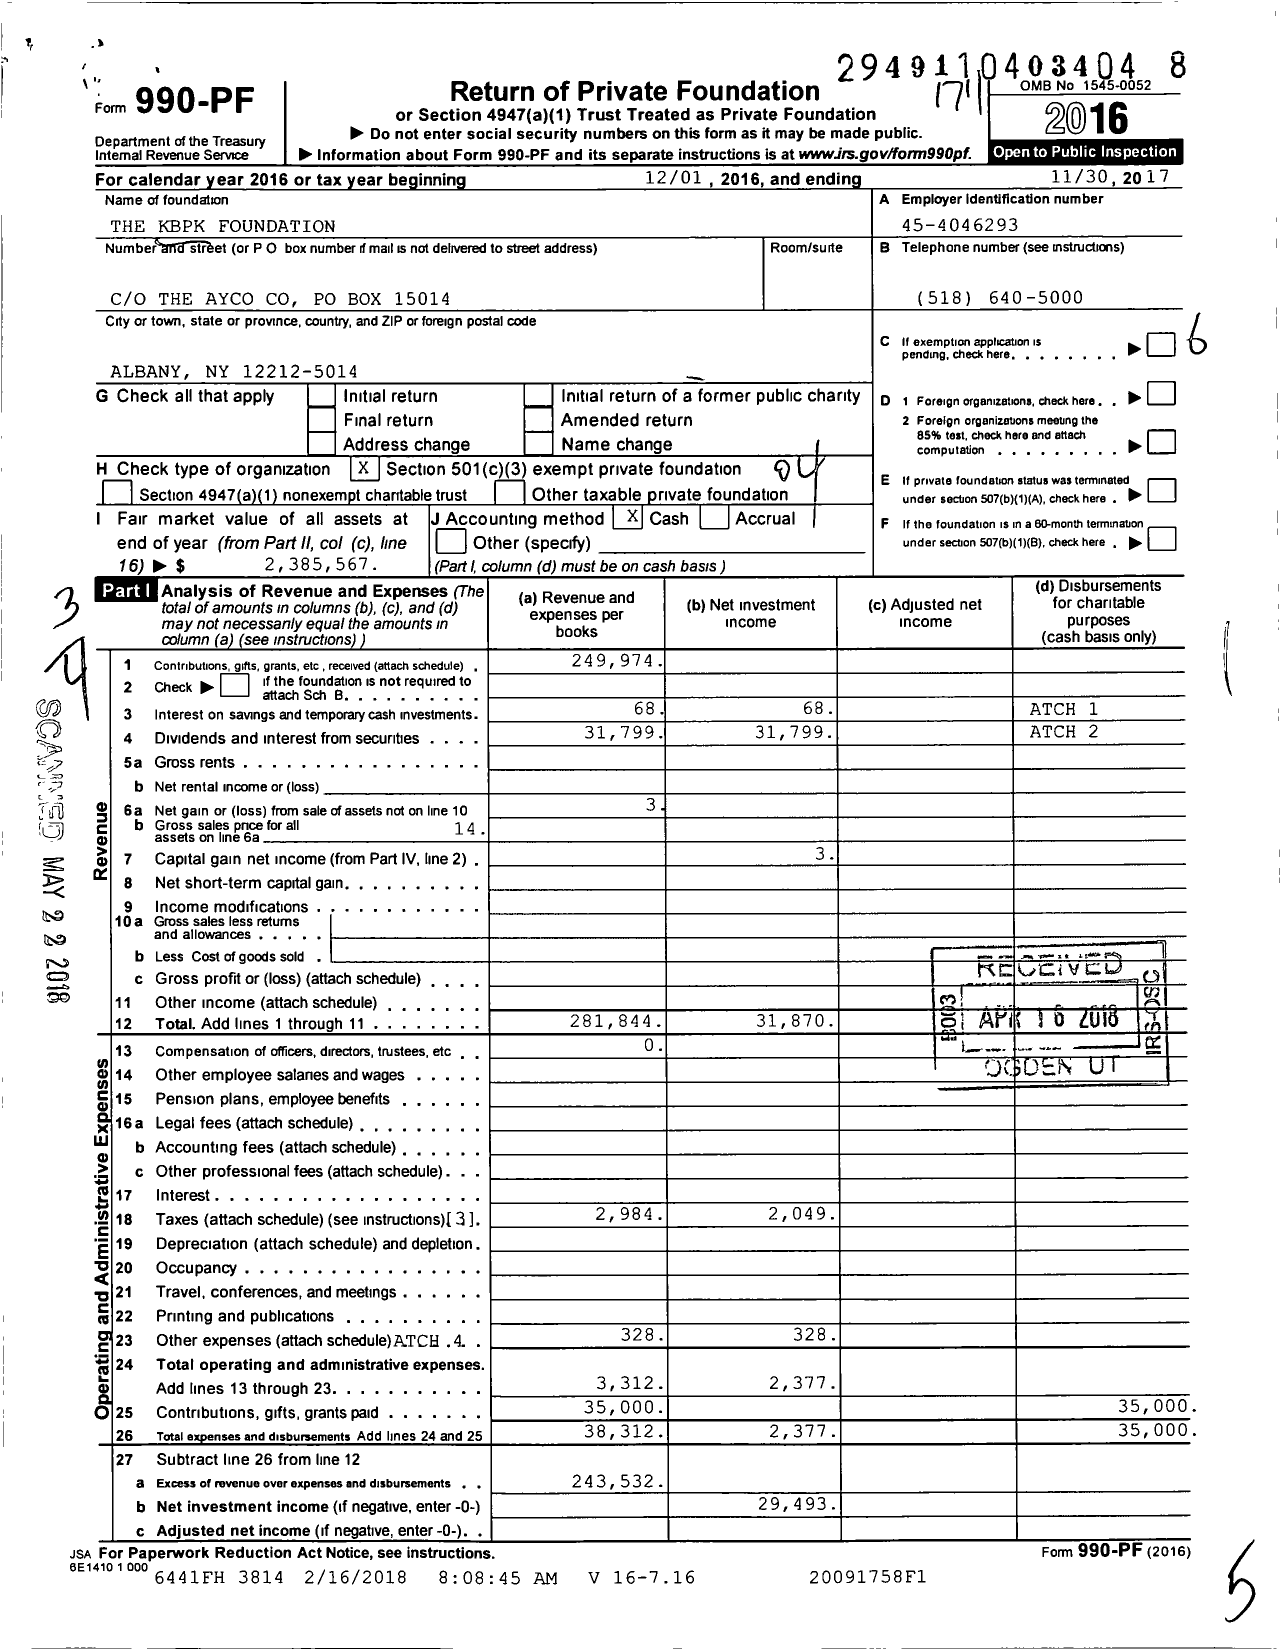 Image of first page of 2016 Form 990PF for KBPK Foundation